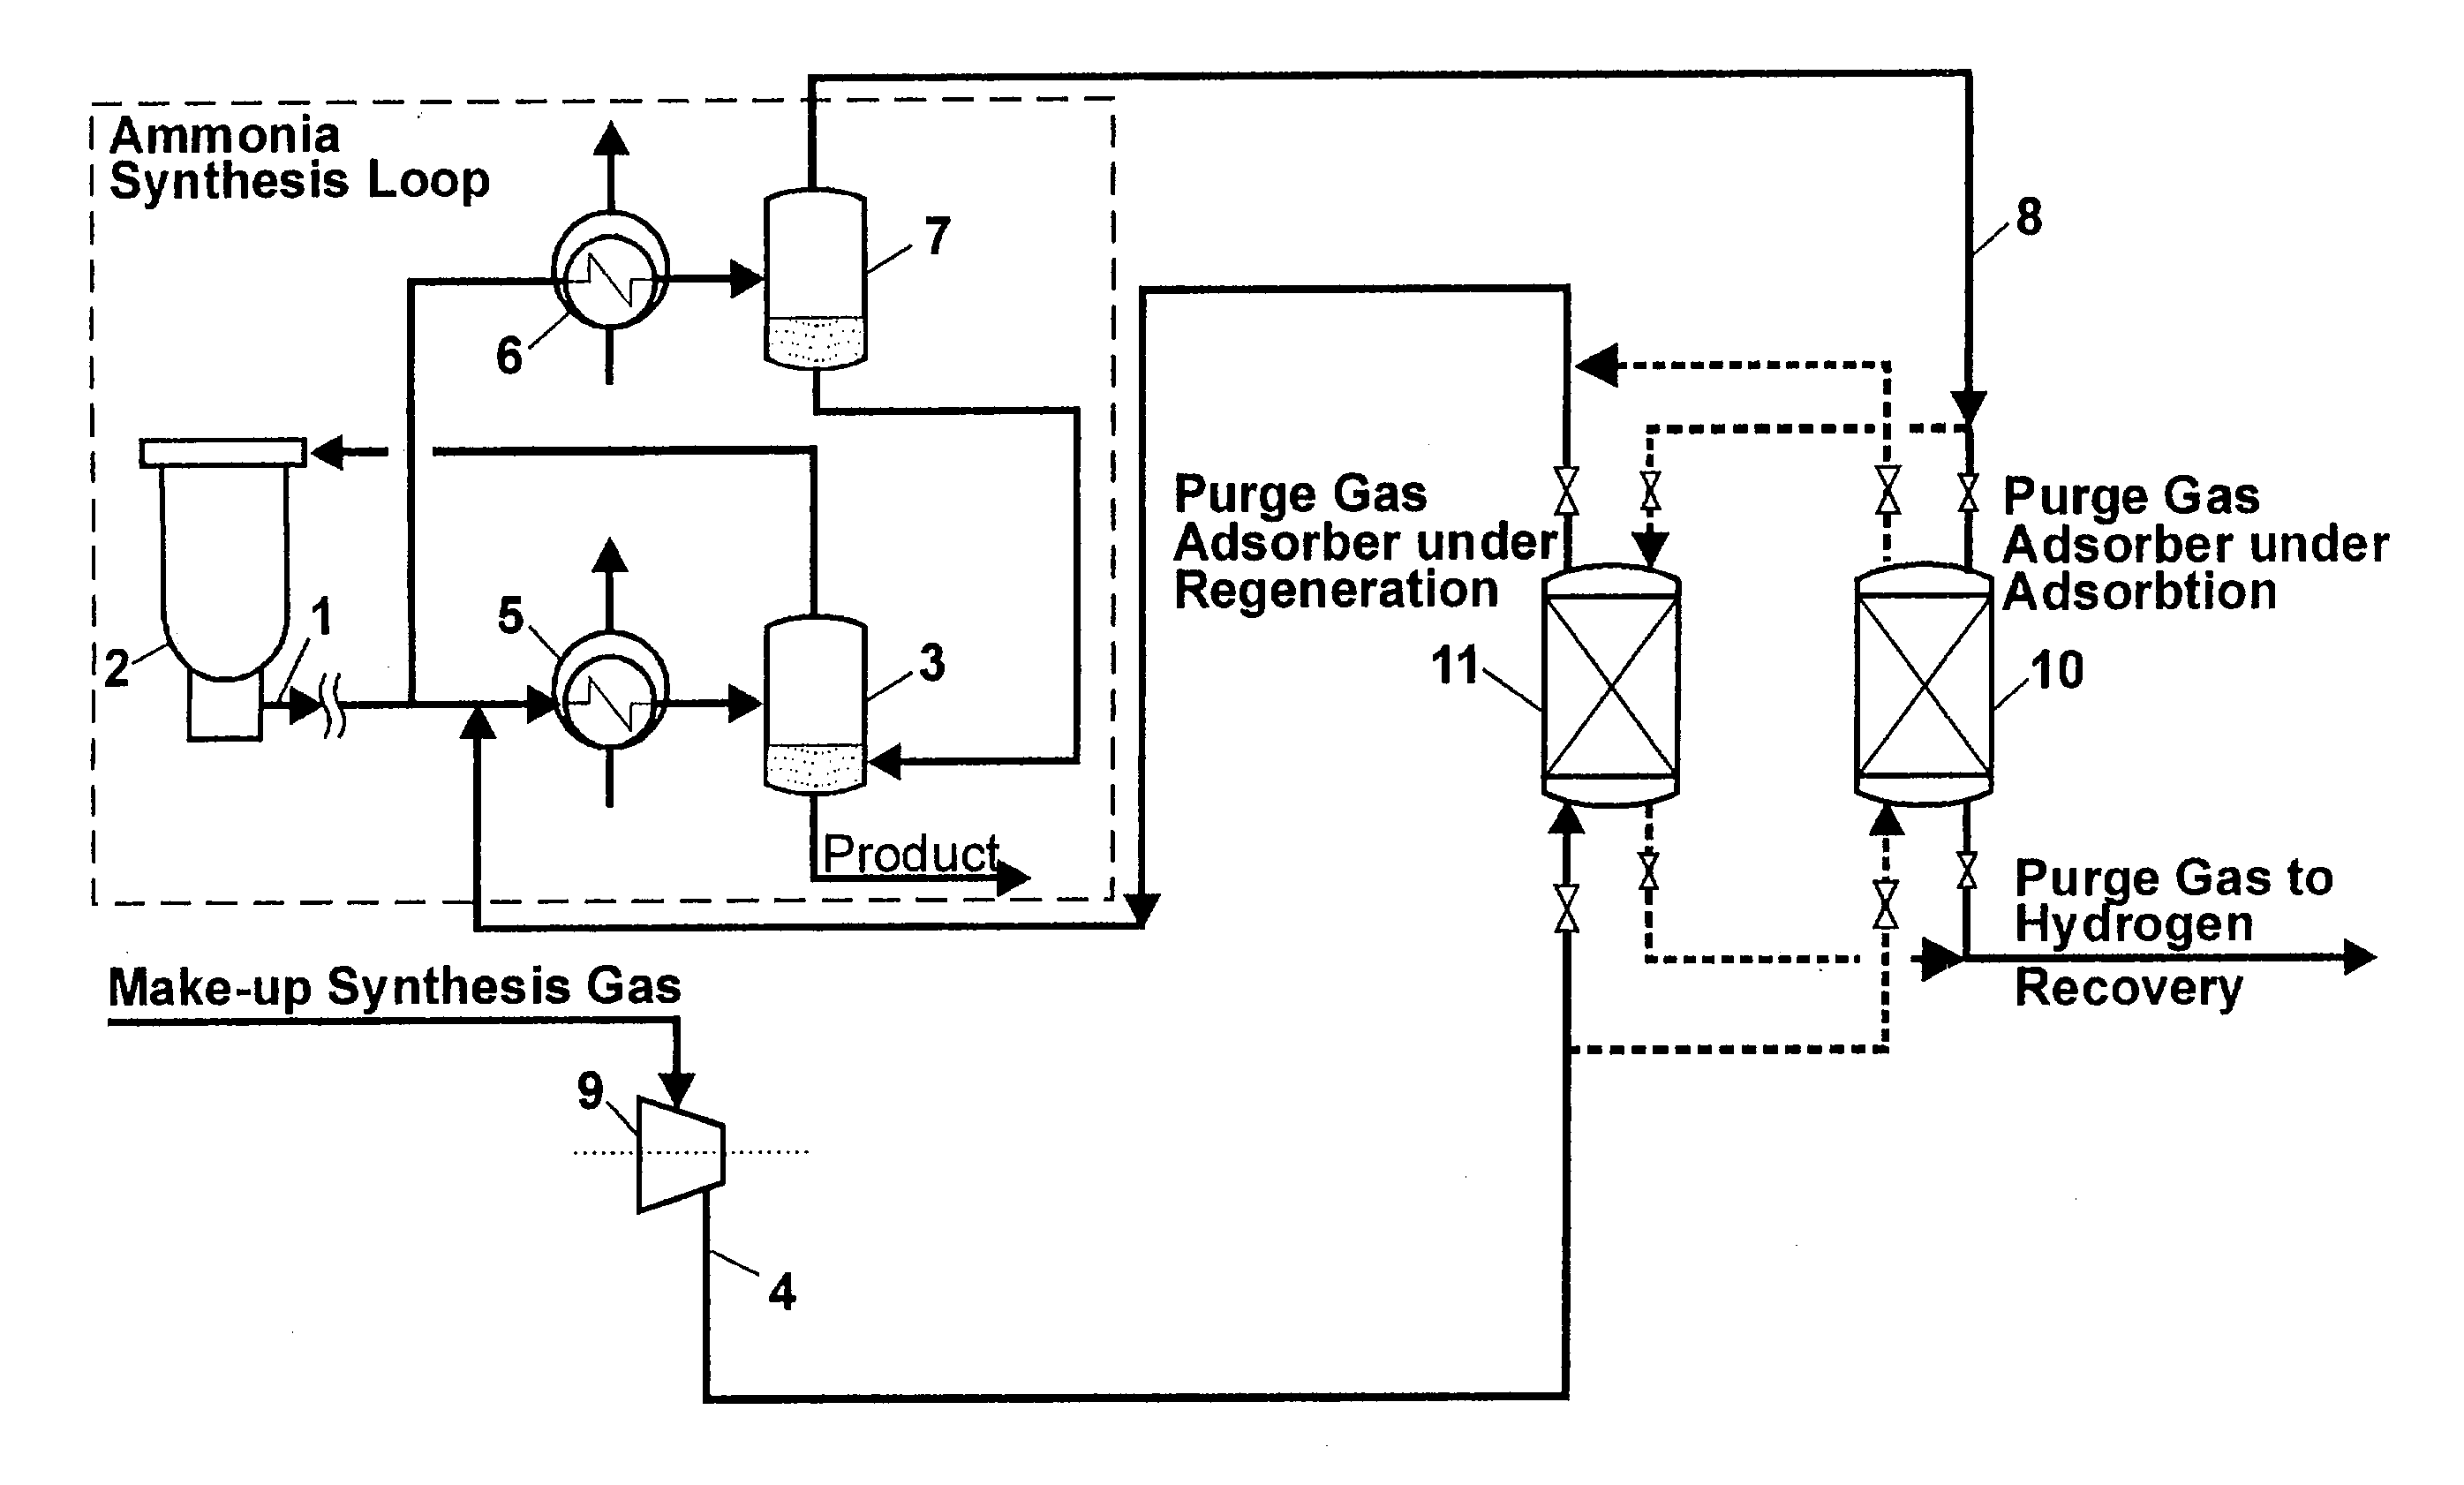 Ammonia recovery from purge gas